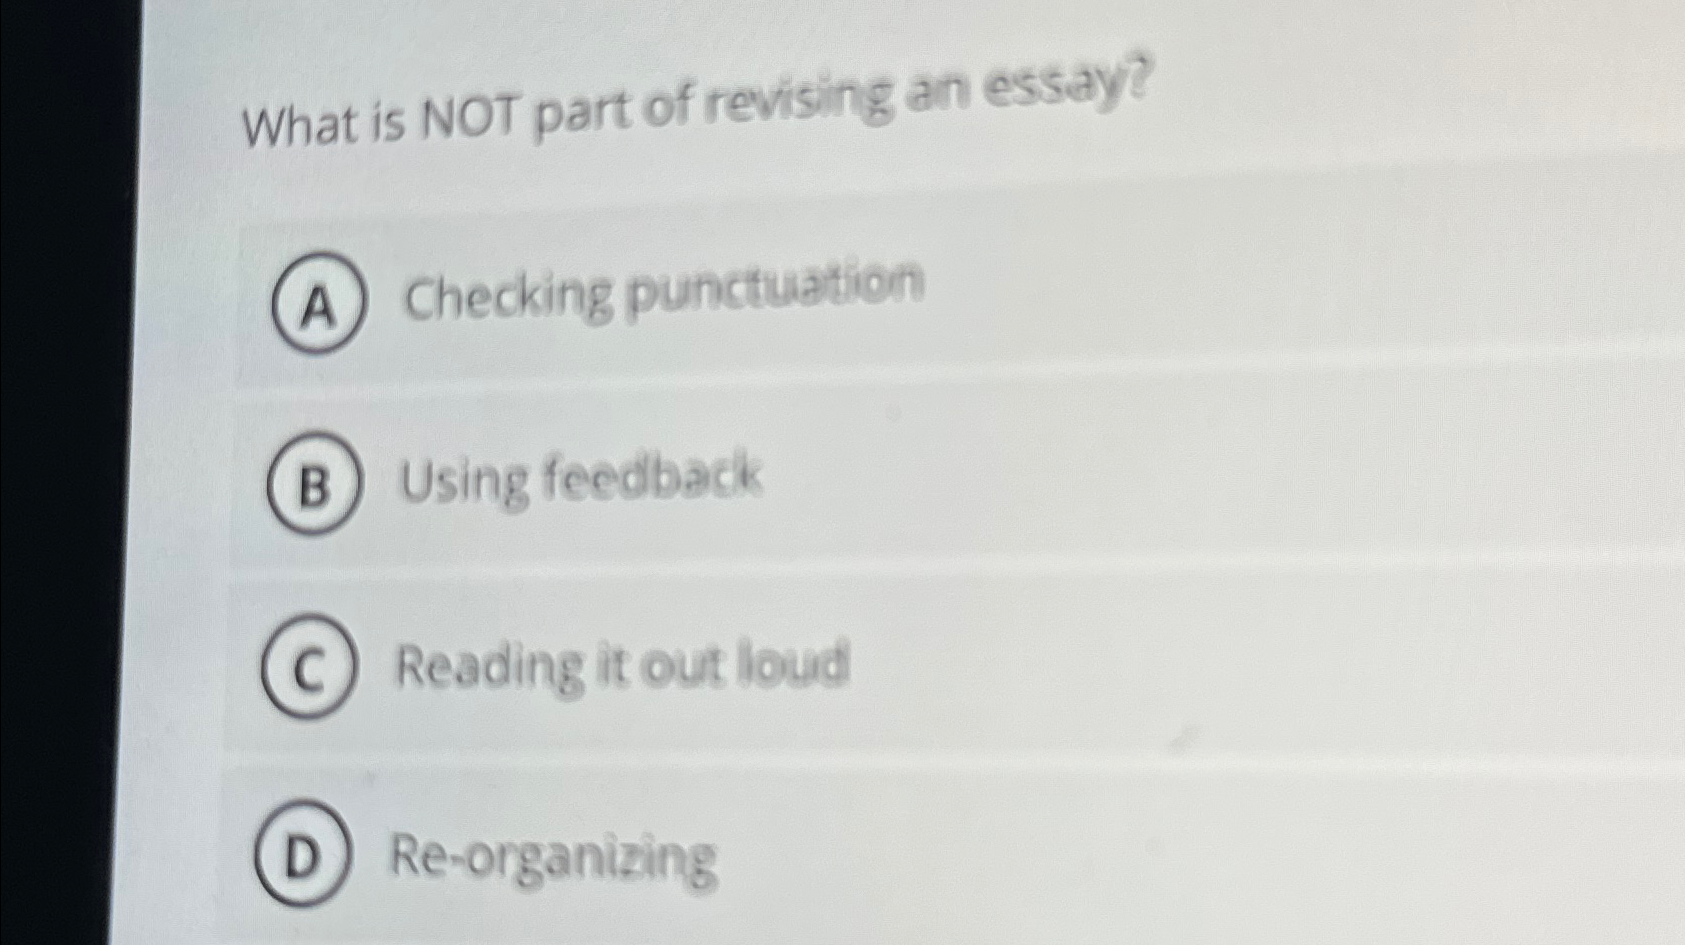 what is not part of revising an essay